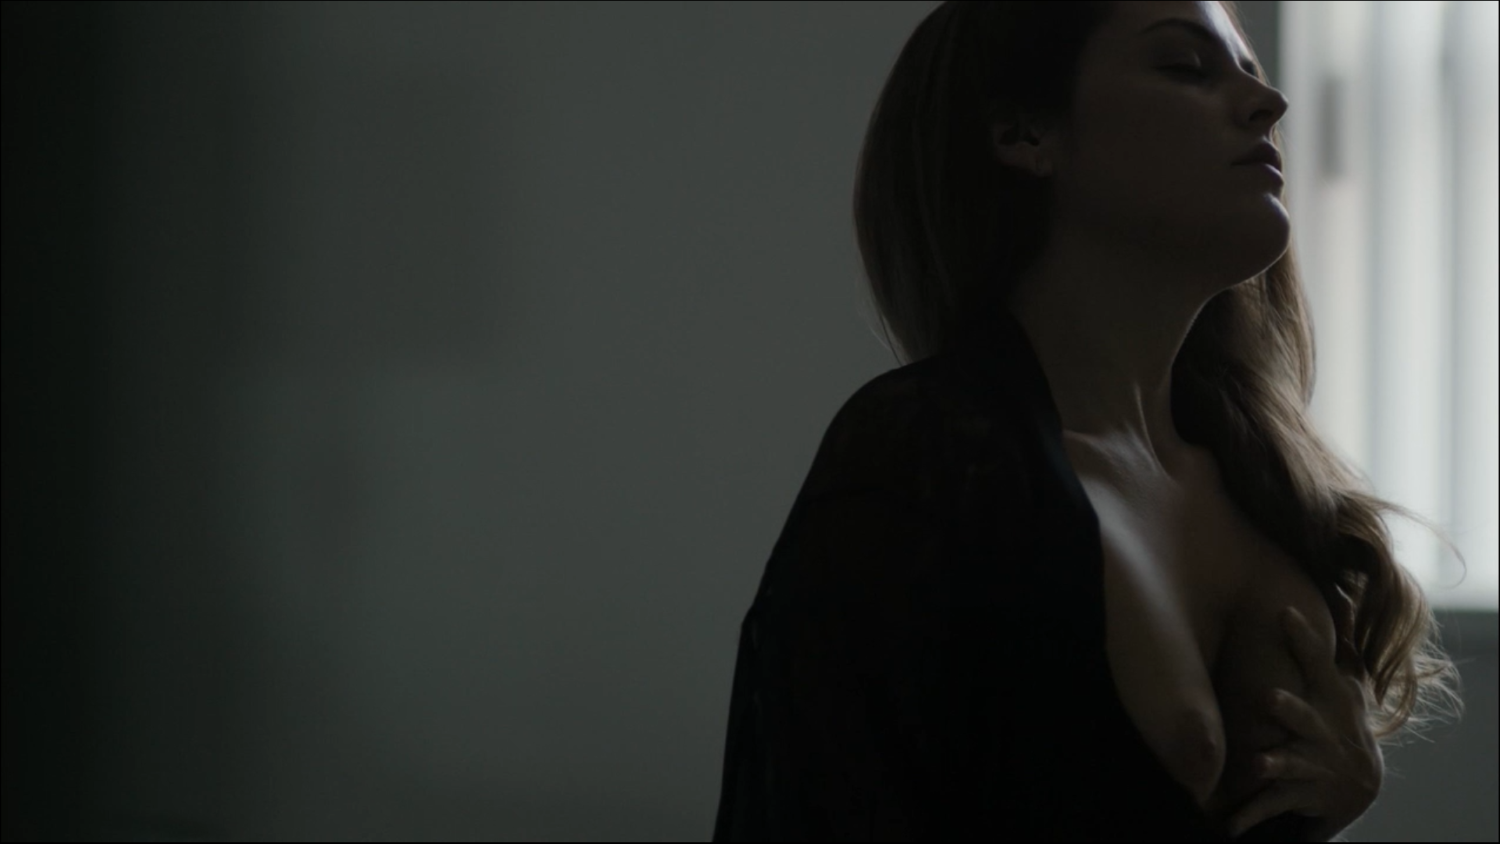 Naked Riley Keough In The Girlfriend Experience I